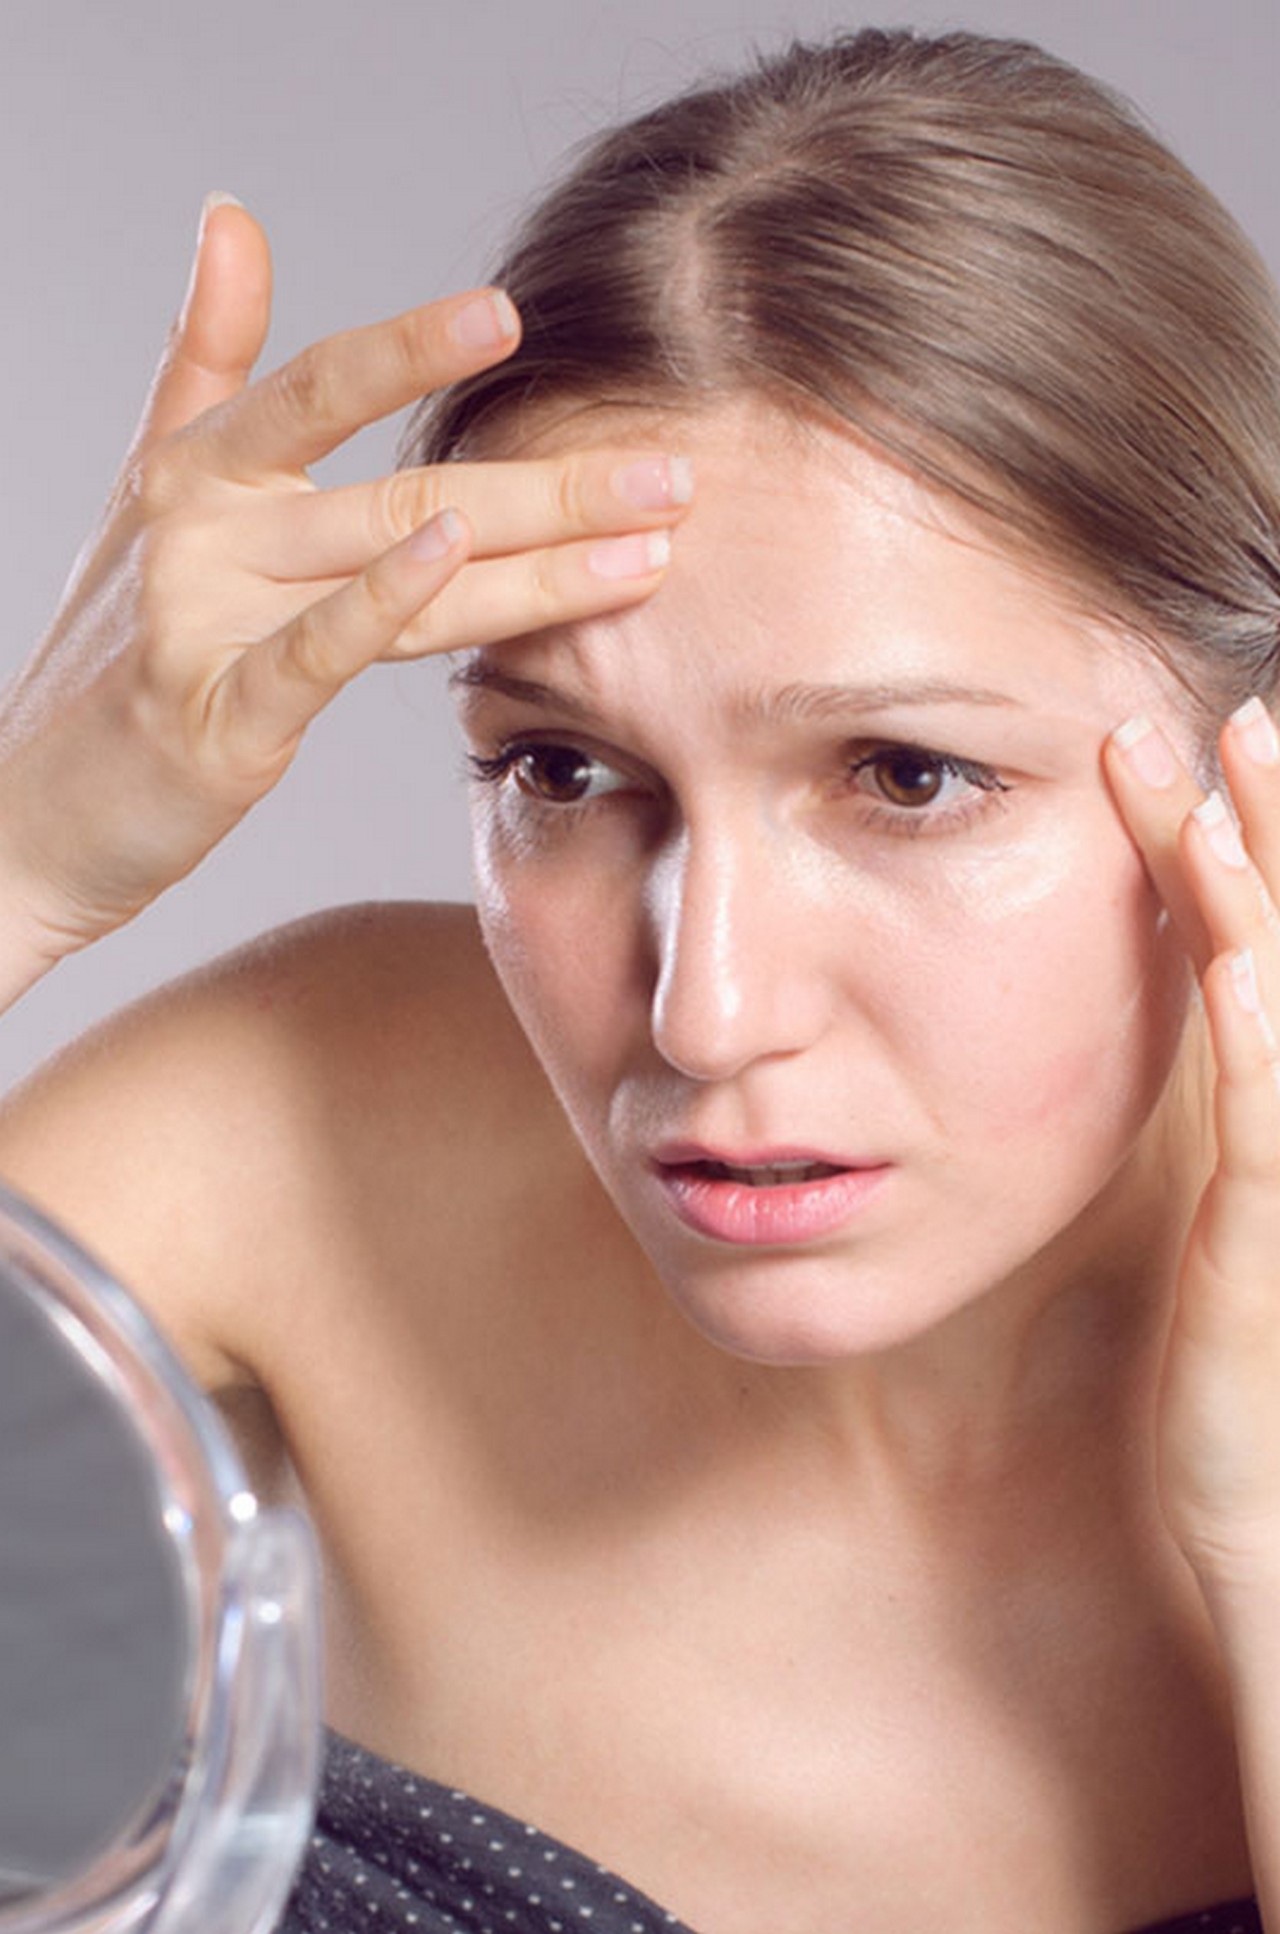  10 Best Home Remedies For Forehead Wrinkles & Prevention Tips